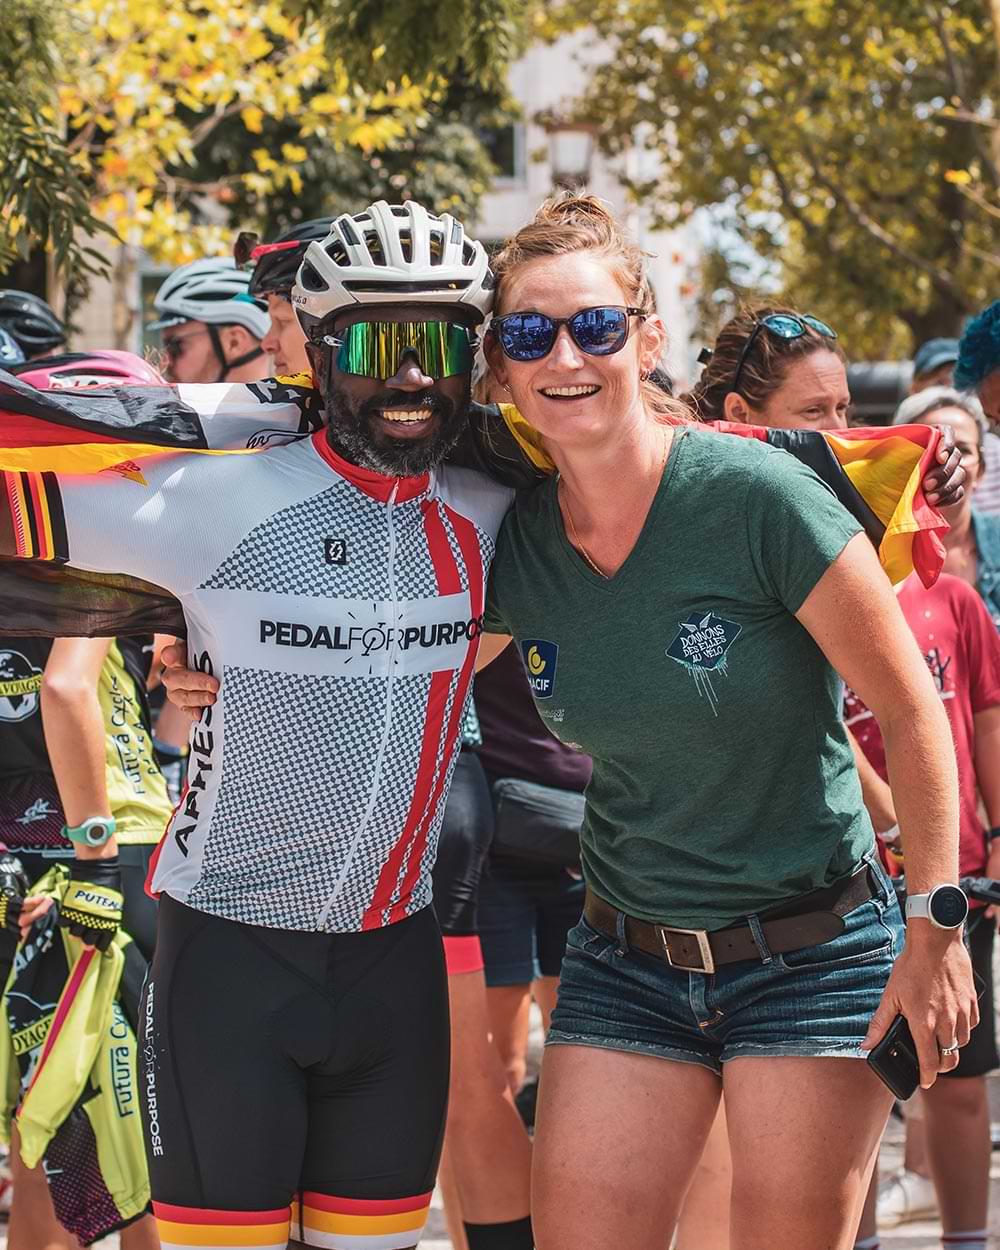 Muyambi caped in his Ugandan black, yellow and red flag smiles and huddles with a woman wearing a shirt and shorts, both smile while wearing sugn glasses in a crowd of cyclists and supporters